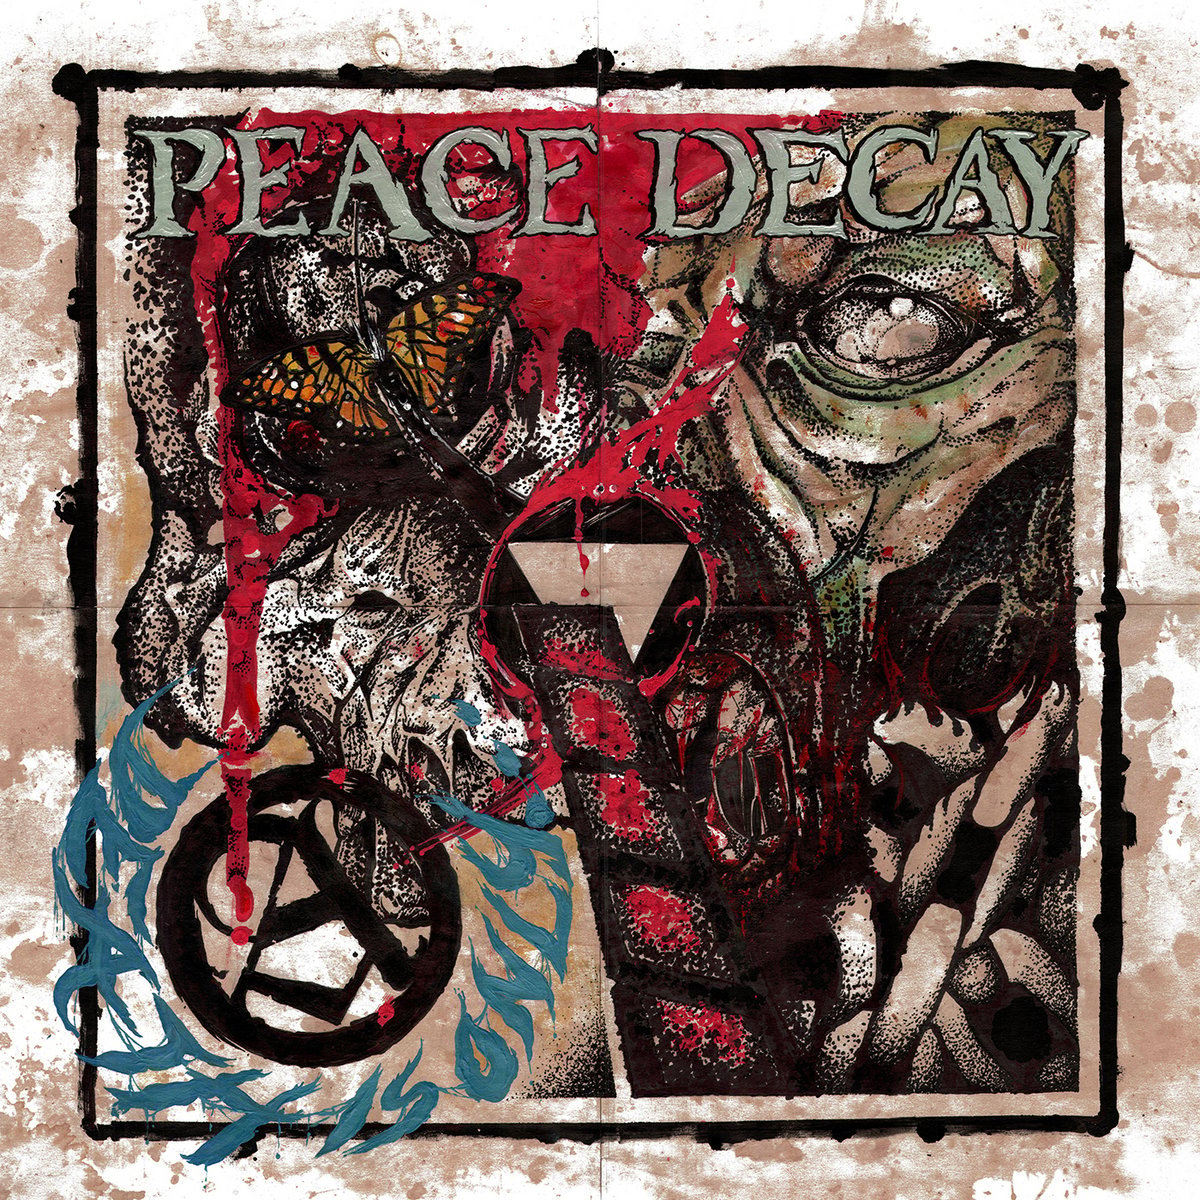 Image of PEACE DECAY - Death Is Only... LP